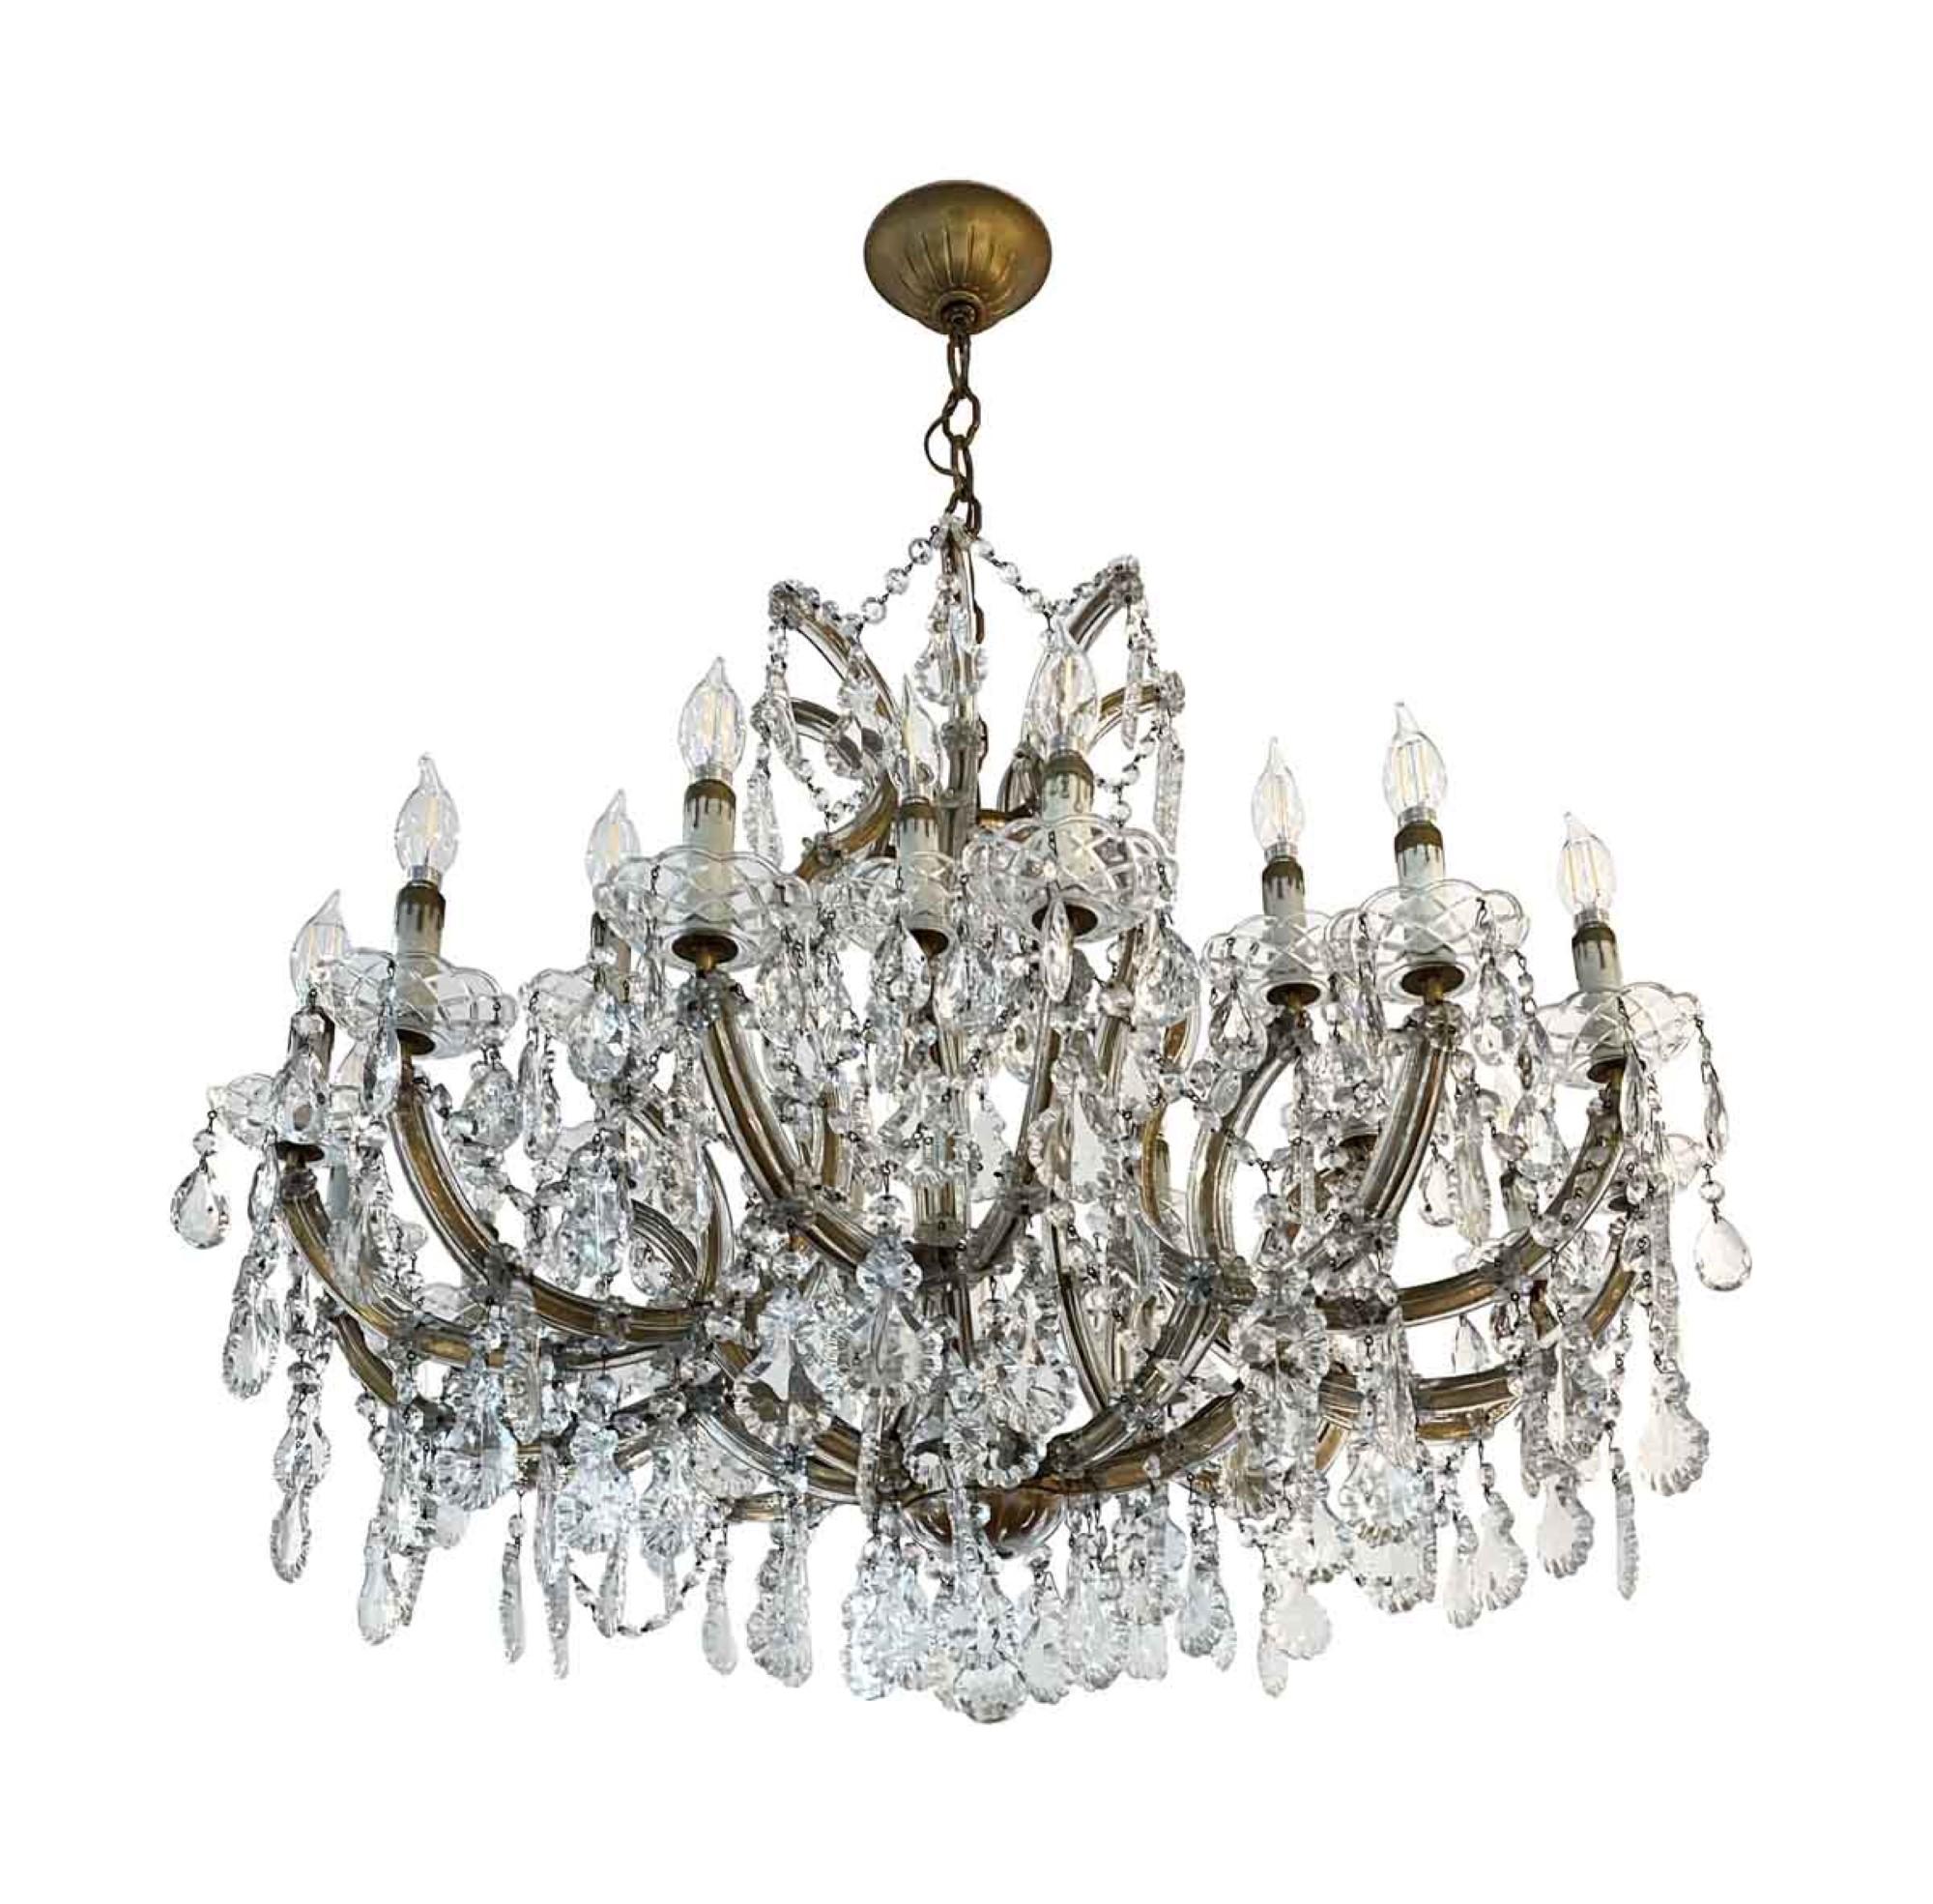 Spectacular 1950s antique 22-light Marie Therese crystal chandelier, with 21-light on the arms, and one-light in the center of the chandelier. This was acquired from an apartment in the 400 block of Park Ave in Manhattan. The bobeches have an etched